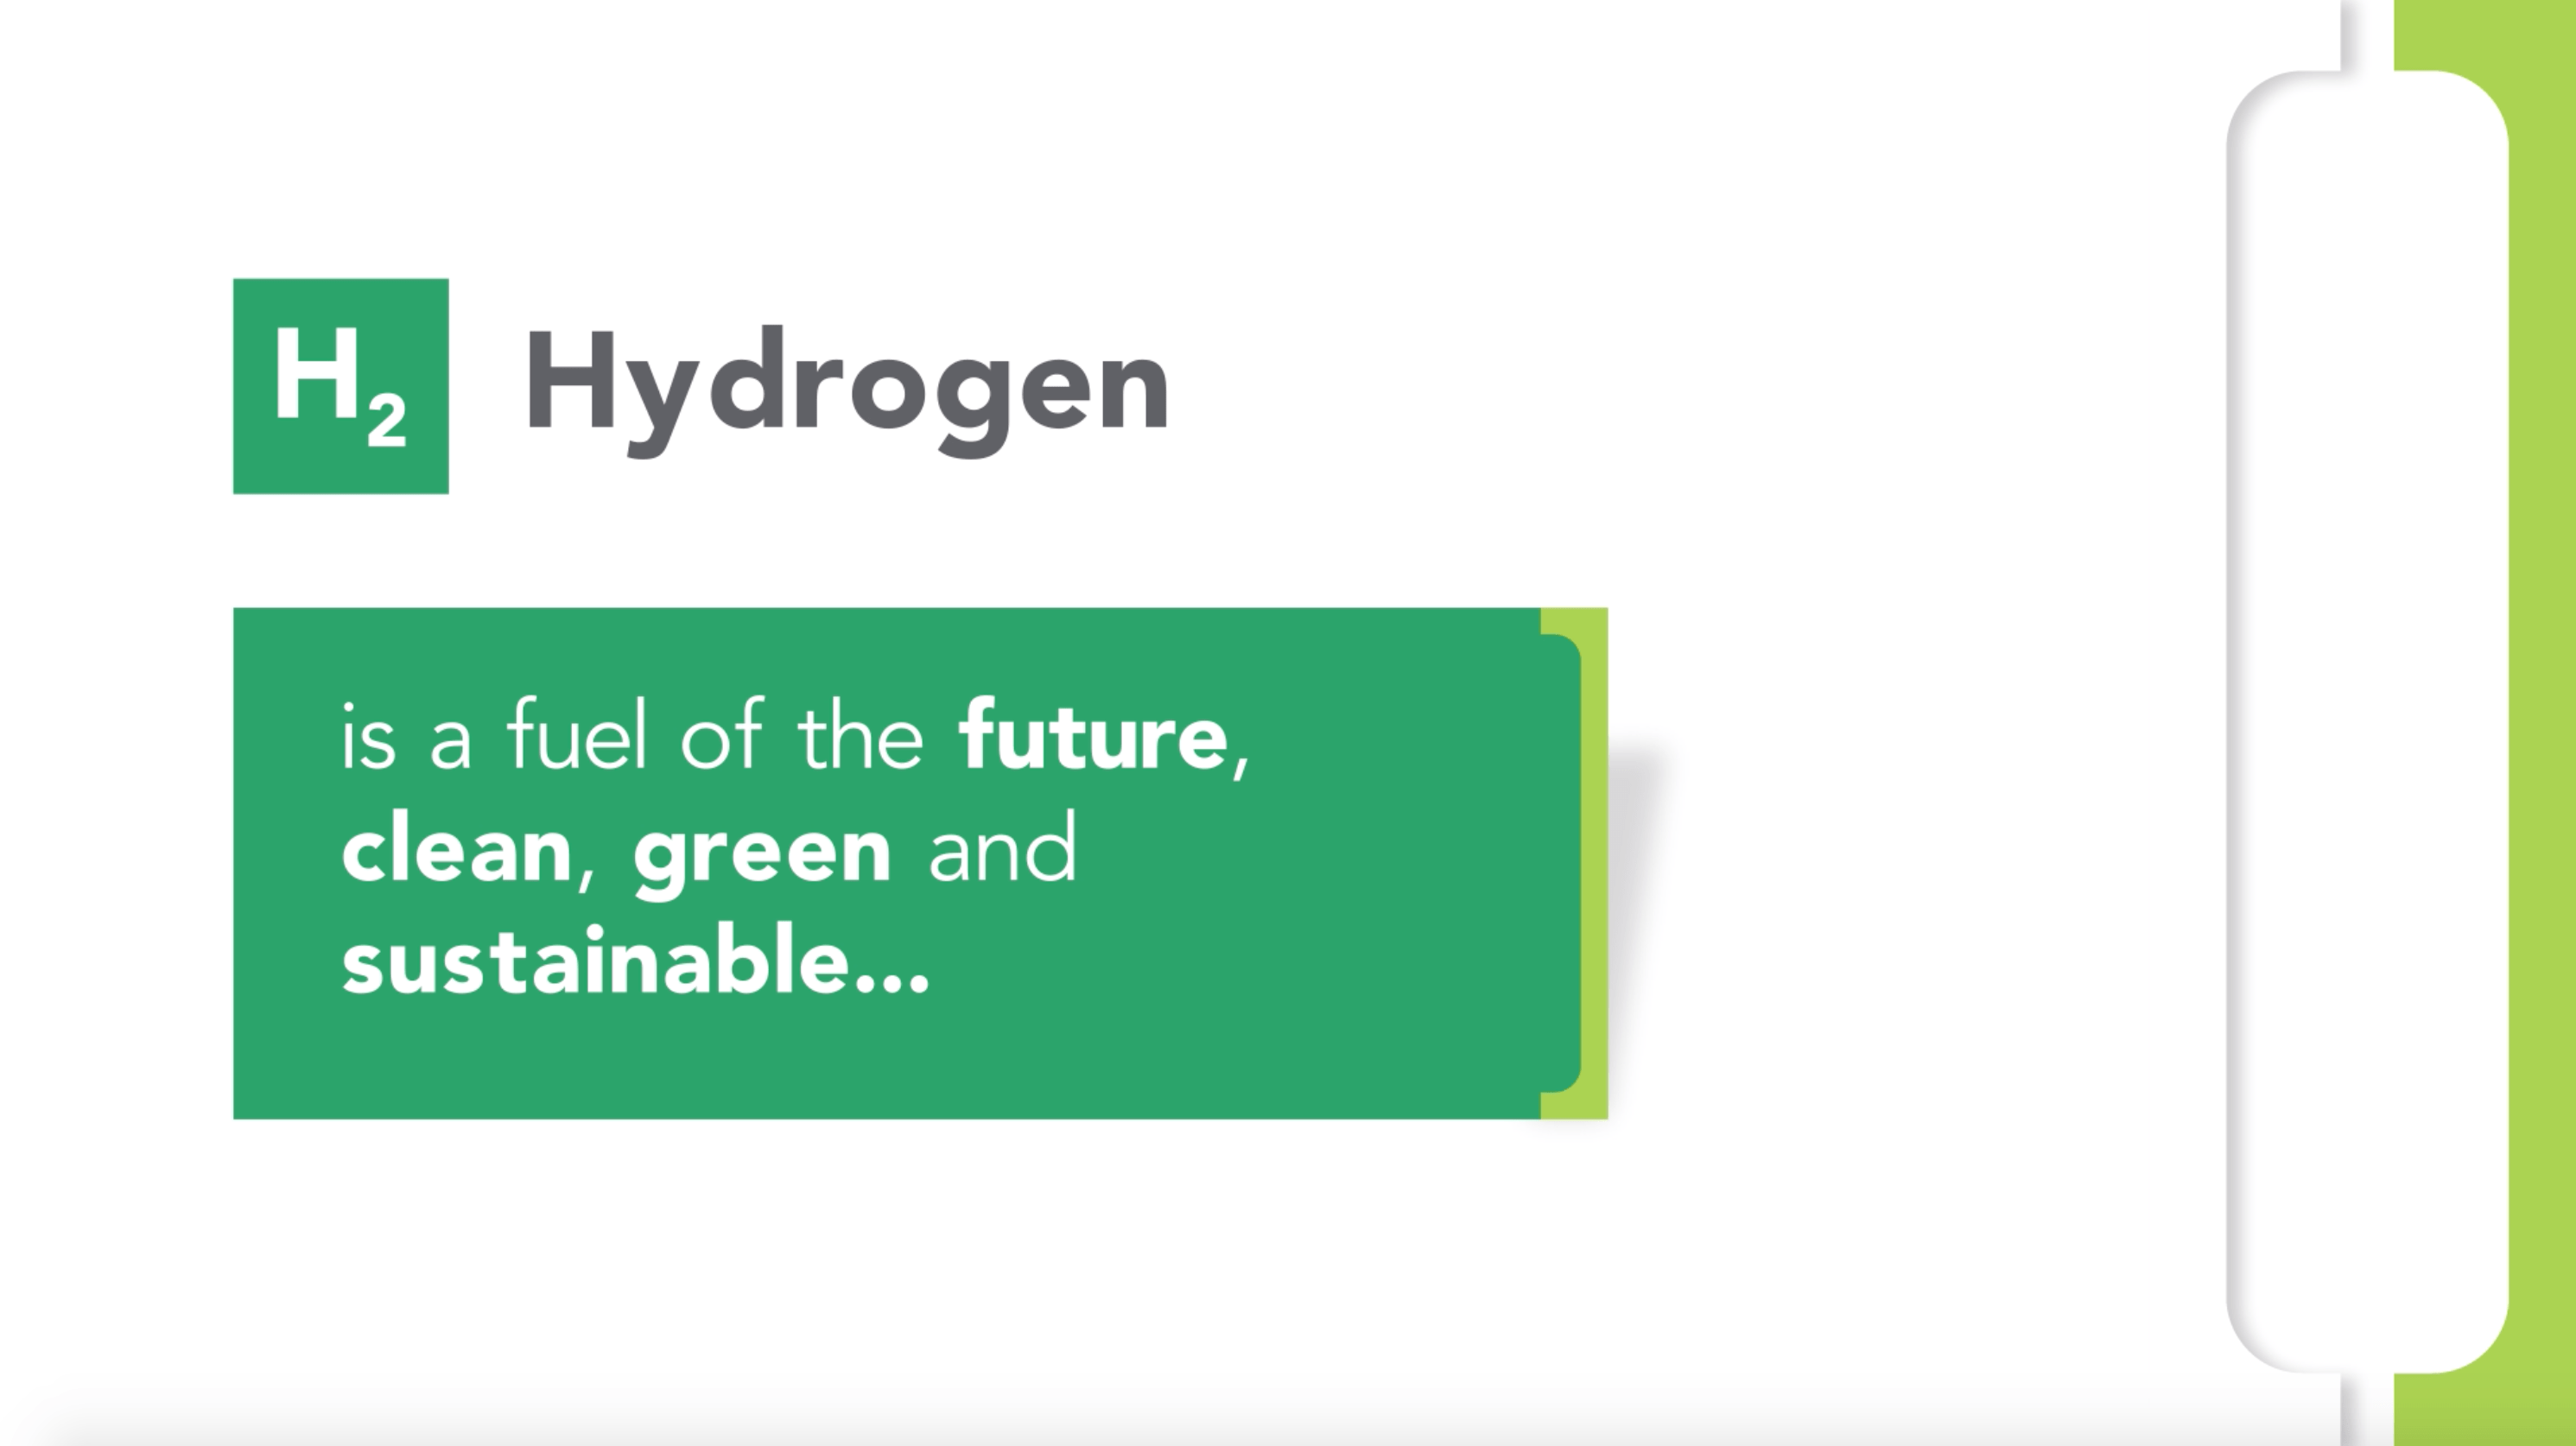 hydrogen, fuel of the future